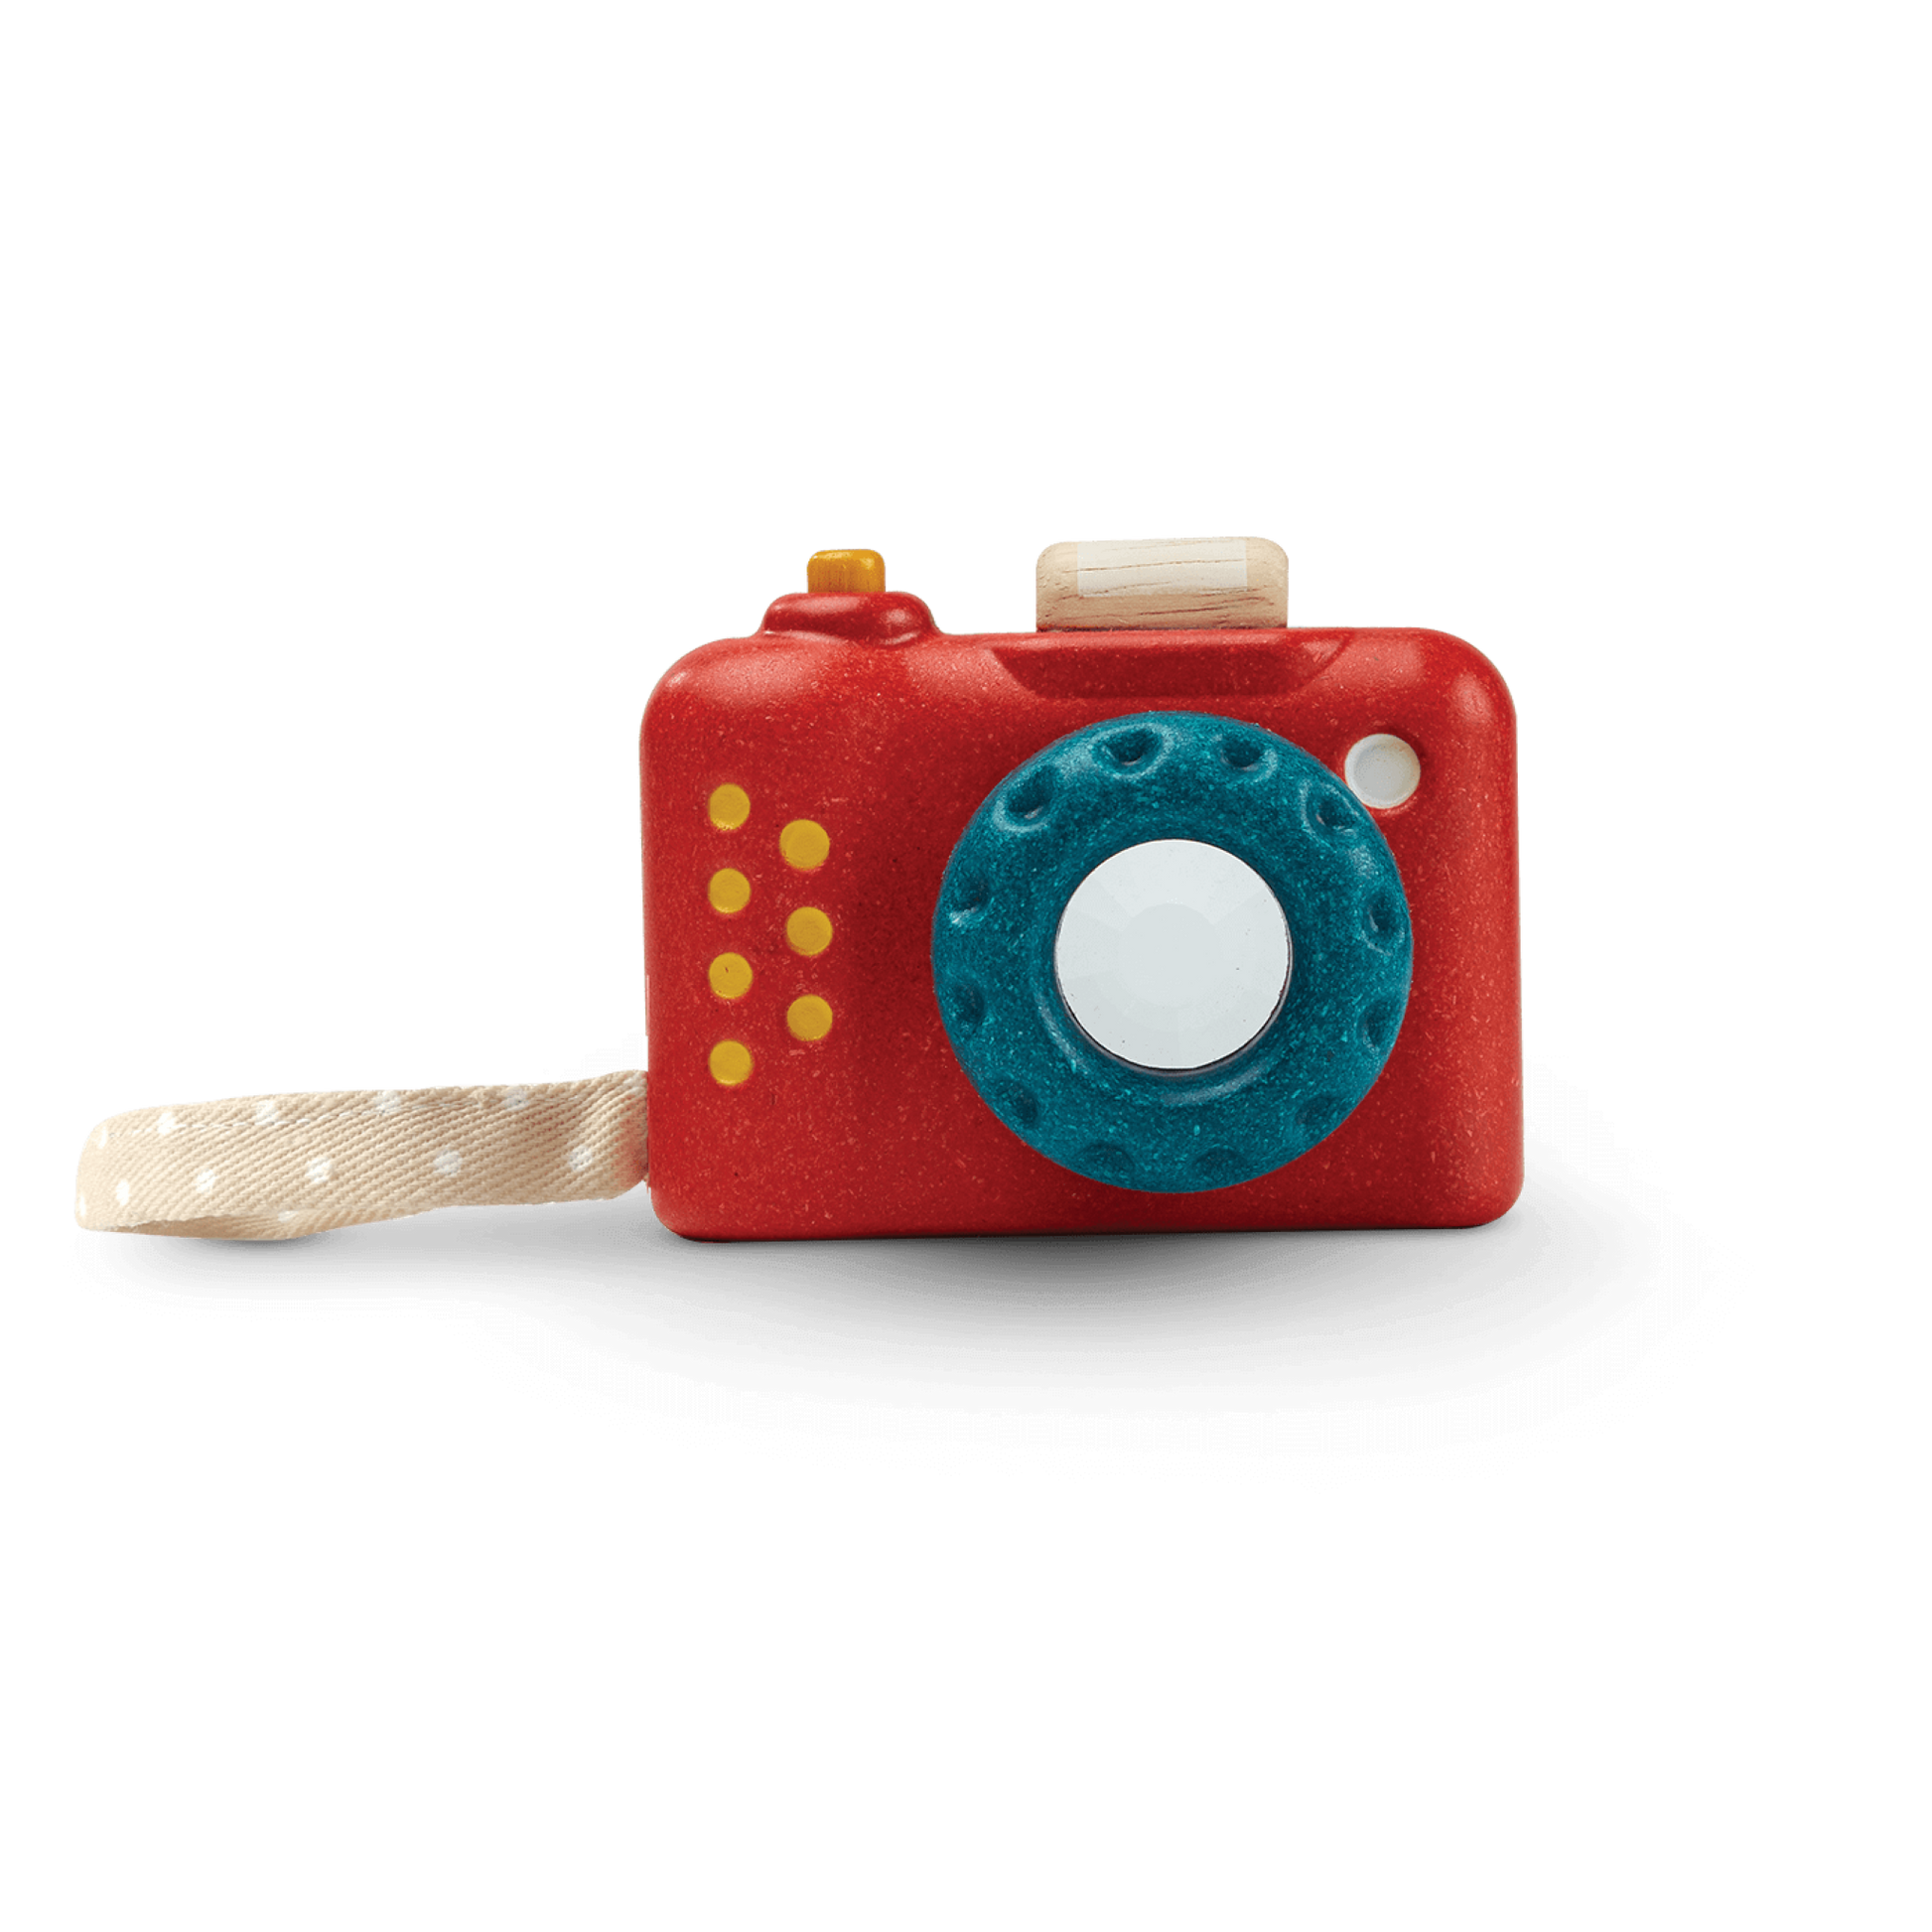 The My First Camera is crafted with PlanWood(TM) a PlanToys material made from surplus sawdust that results in a more flexible water-resistant wood and is pigmented with water-based and natural dyes that are free from harmful chemicals.